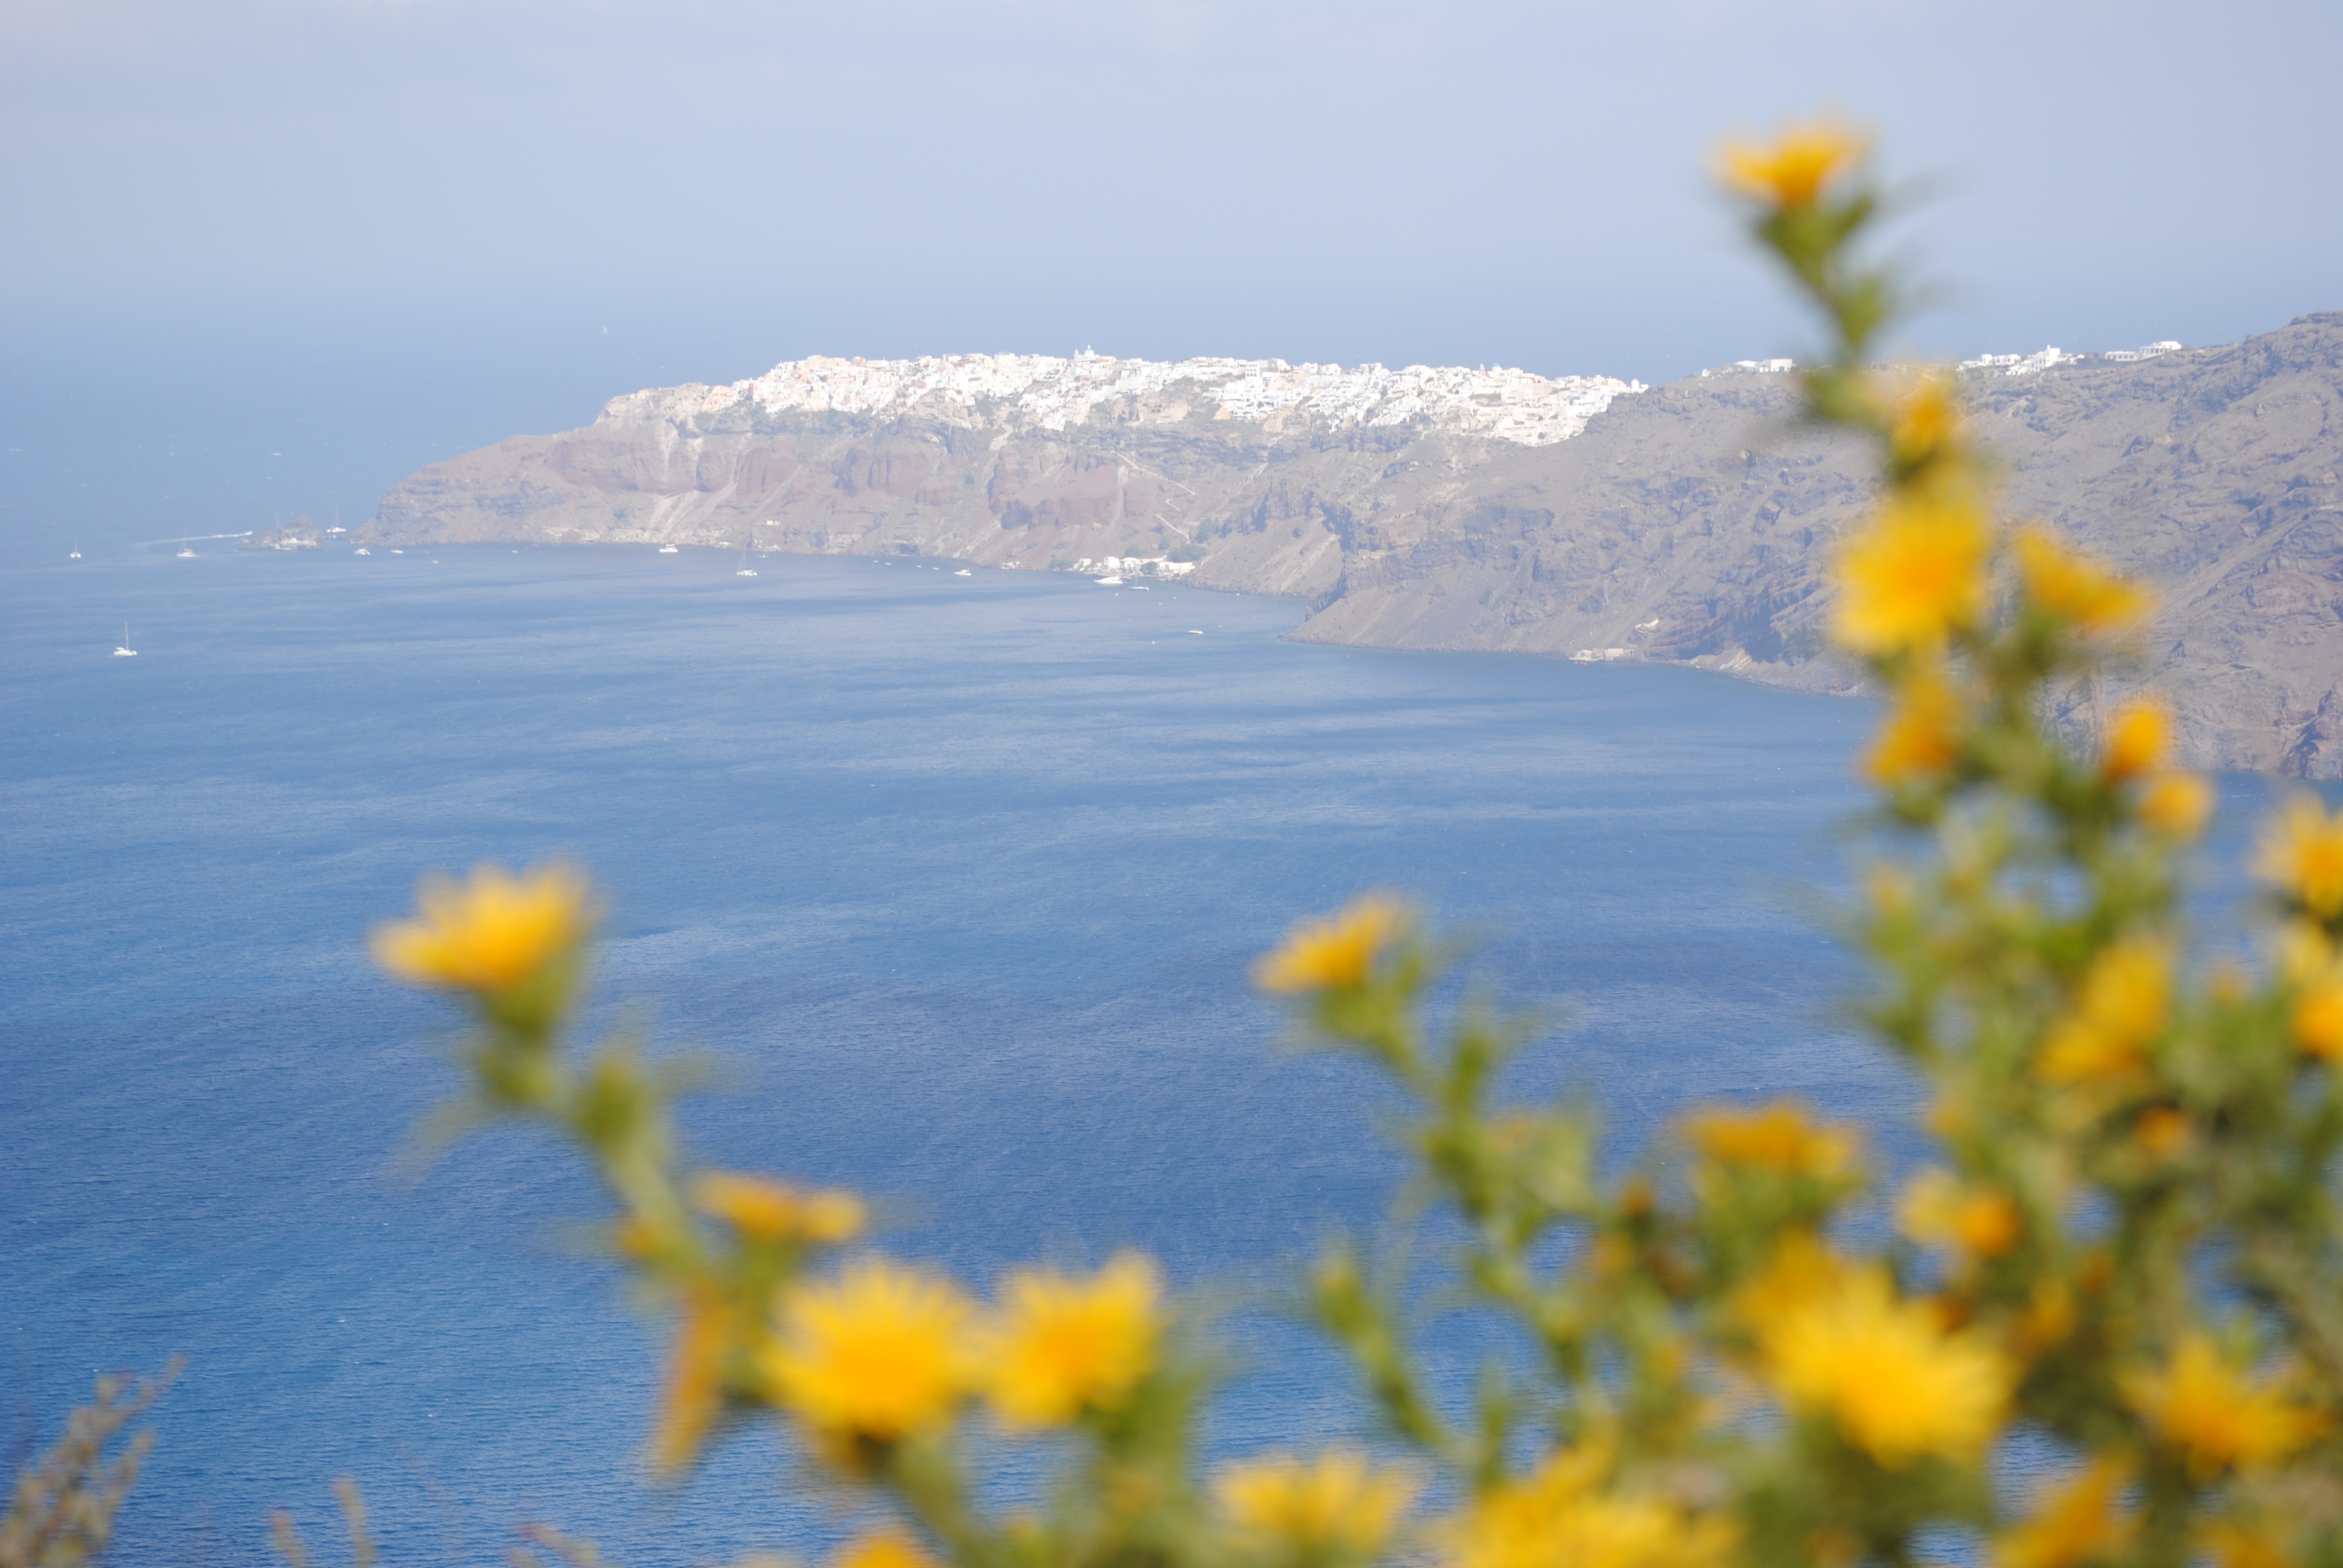 Hiking from Fira to Oia